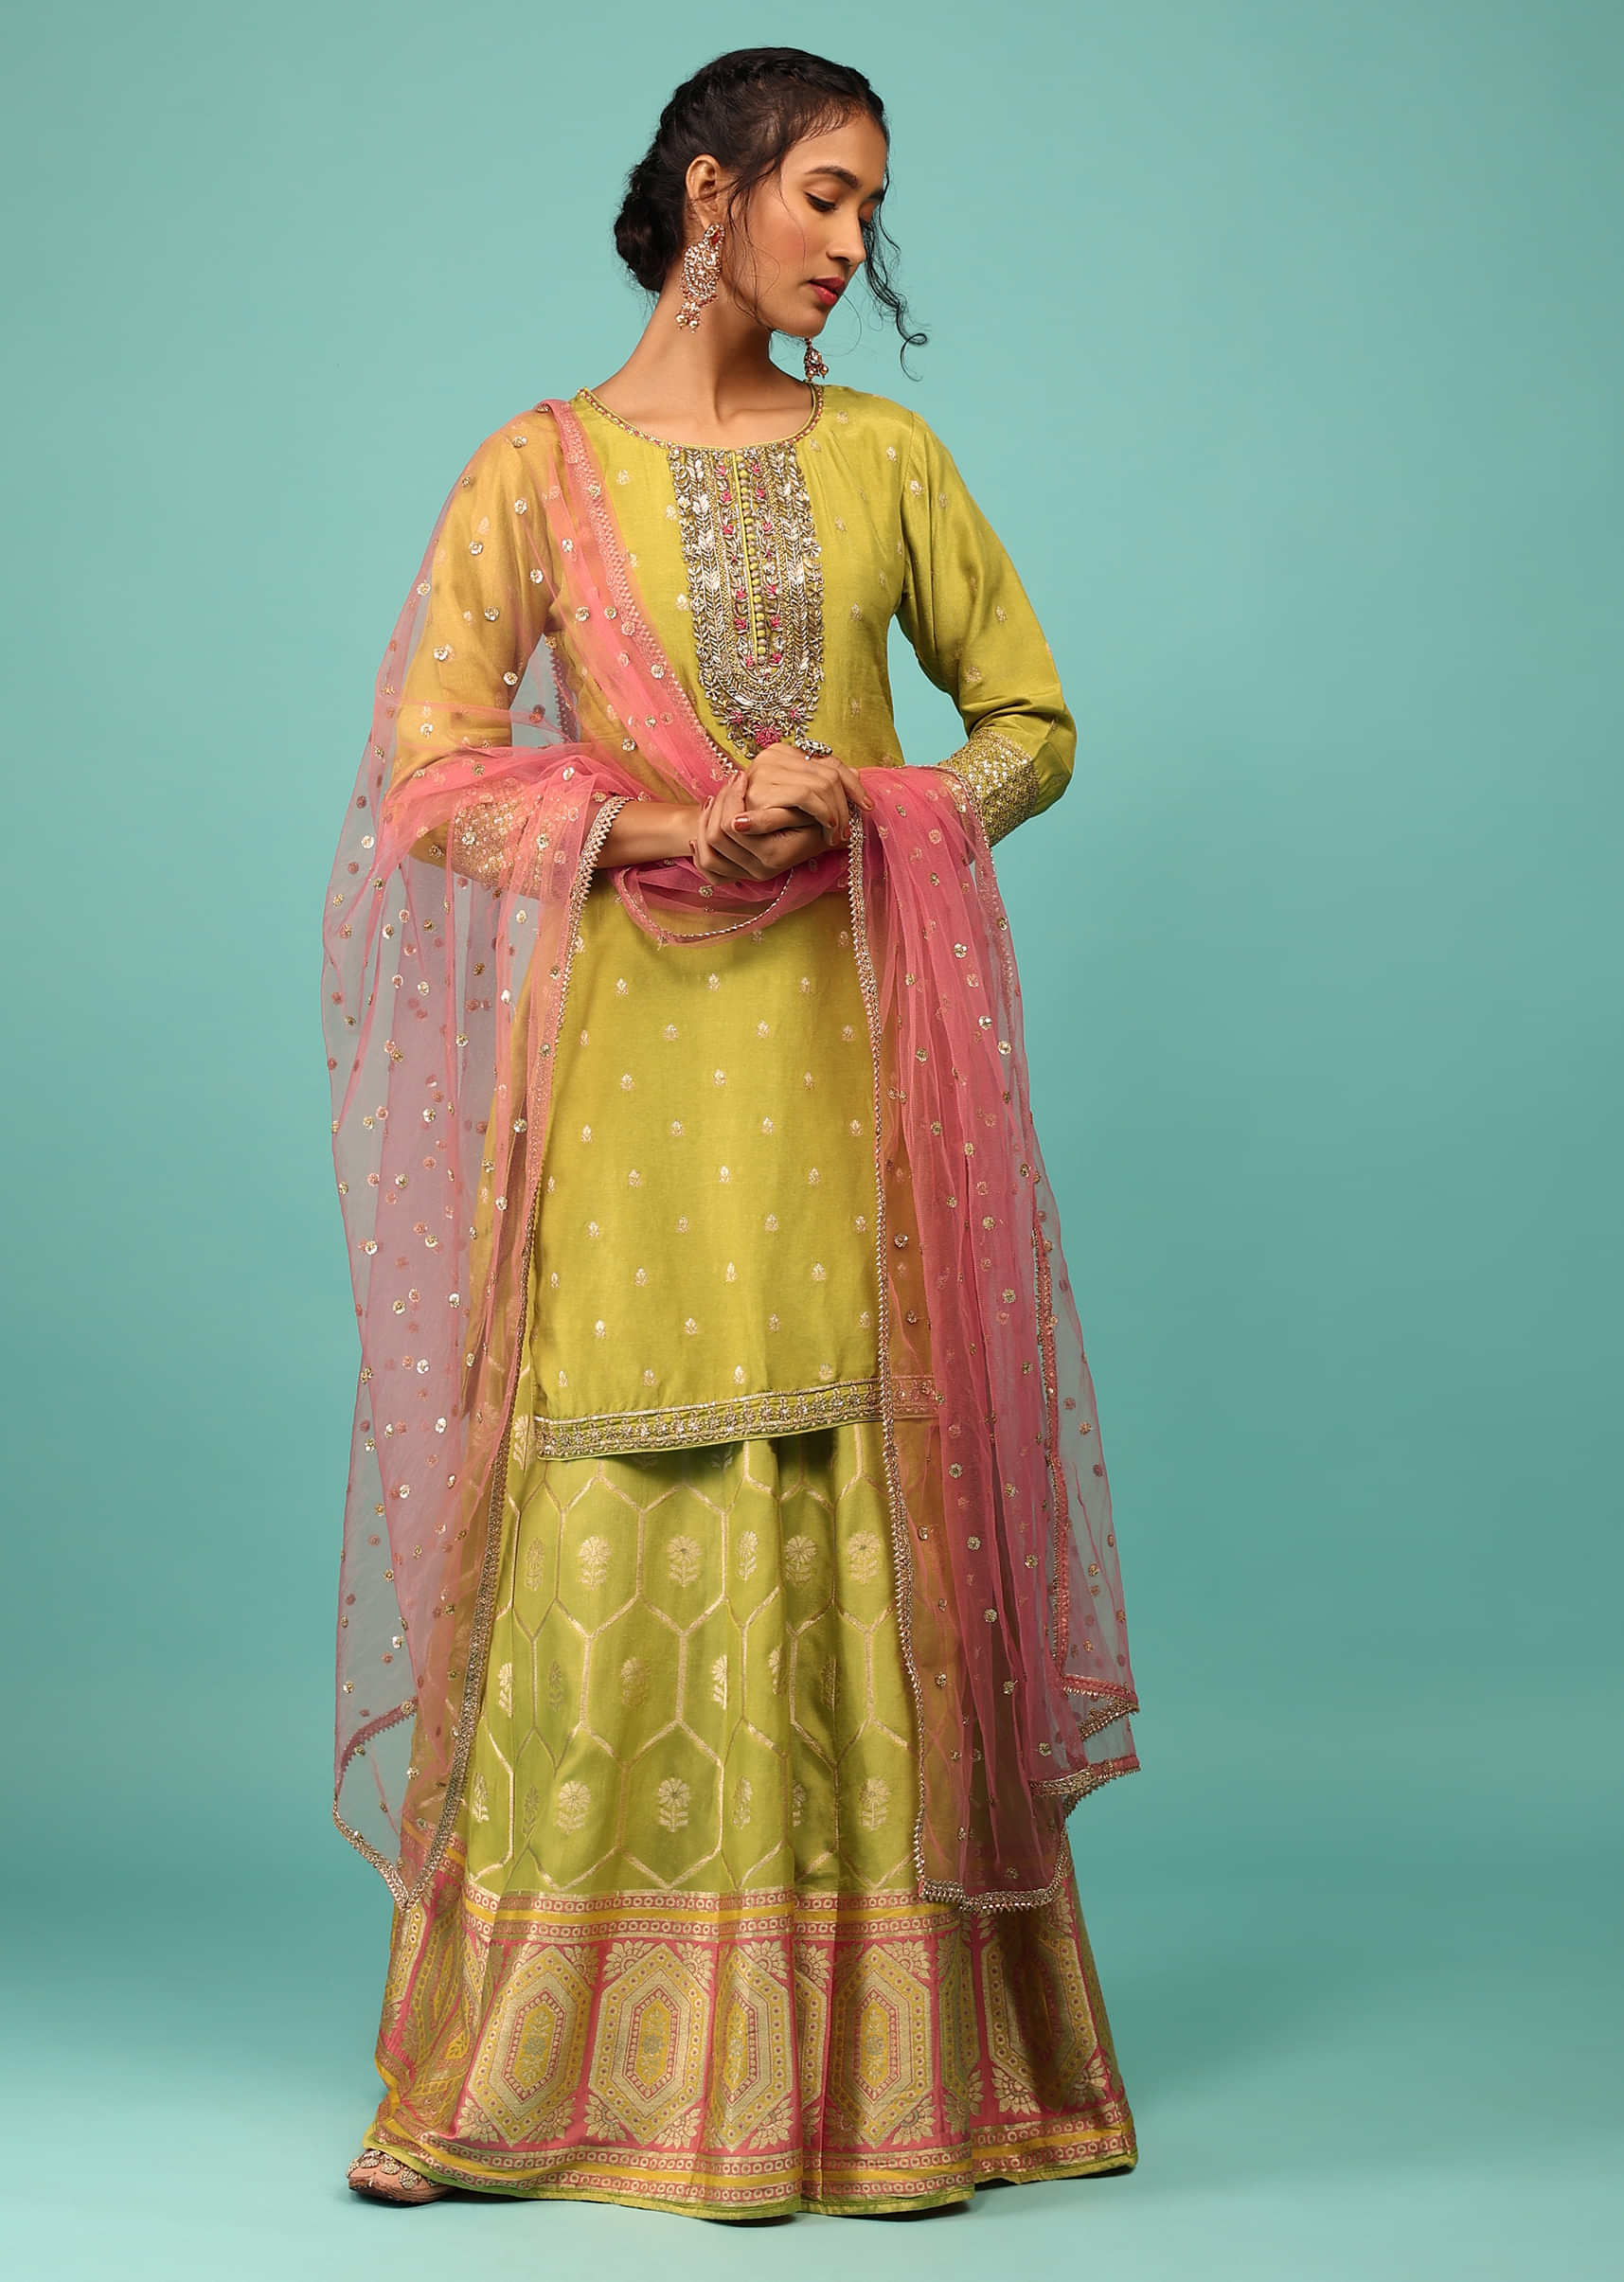 Linden Green Palazzo Suit In Dola Silk With Embroidery And Pink Net Dupatta